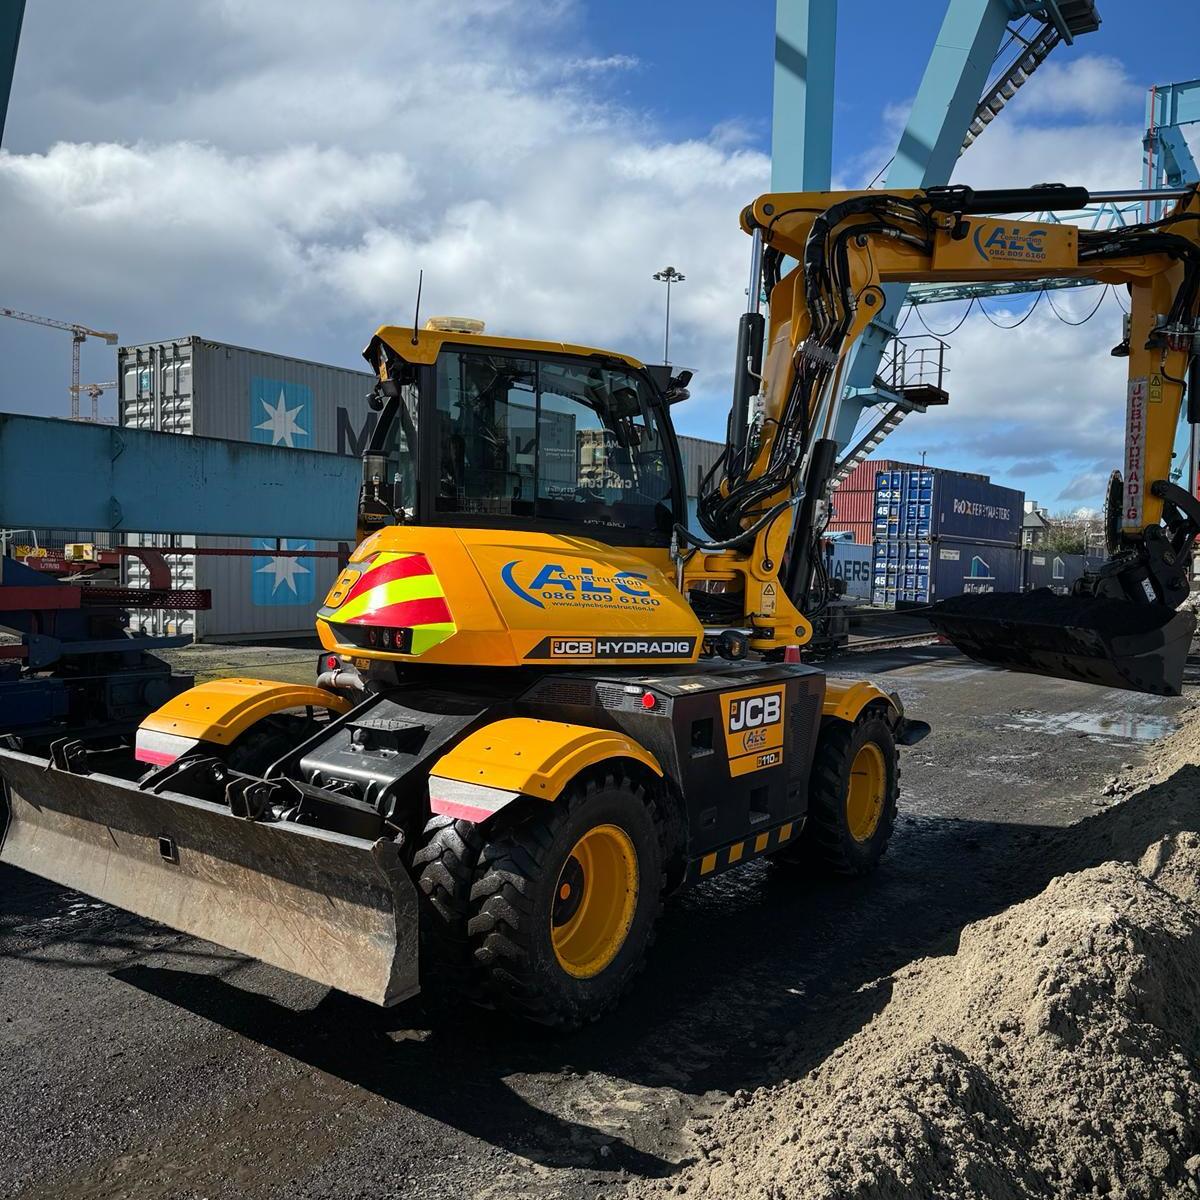 A Lynch Construction project for Peel Ports Dublin